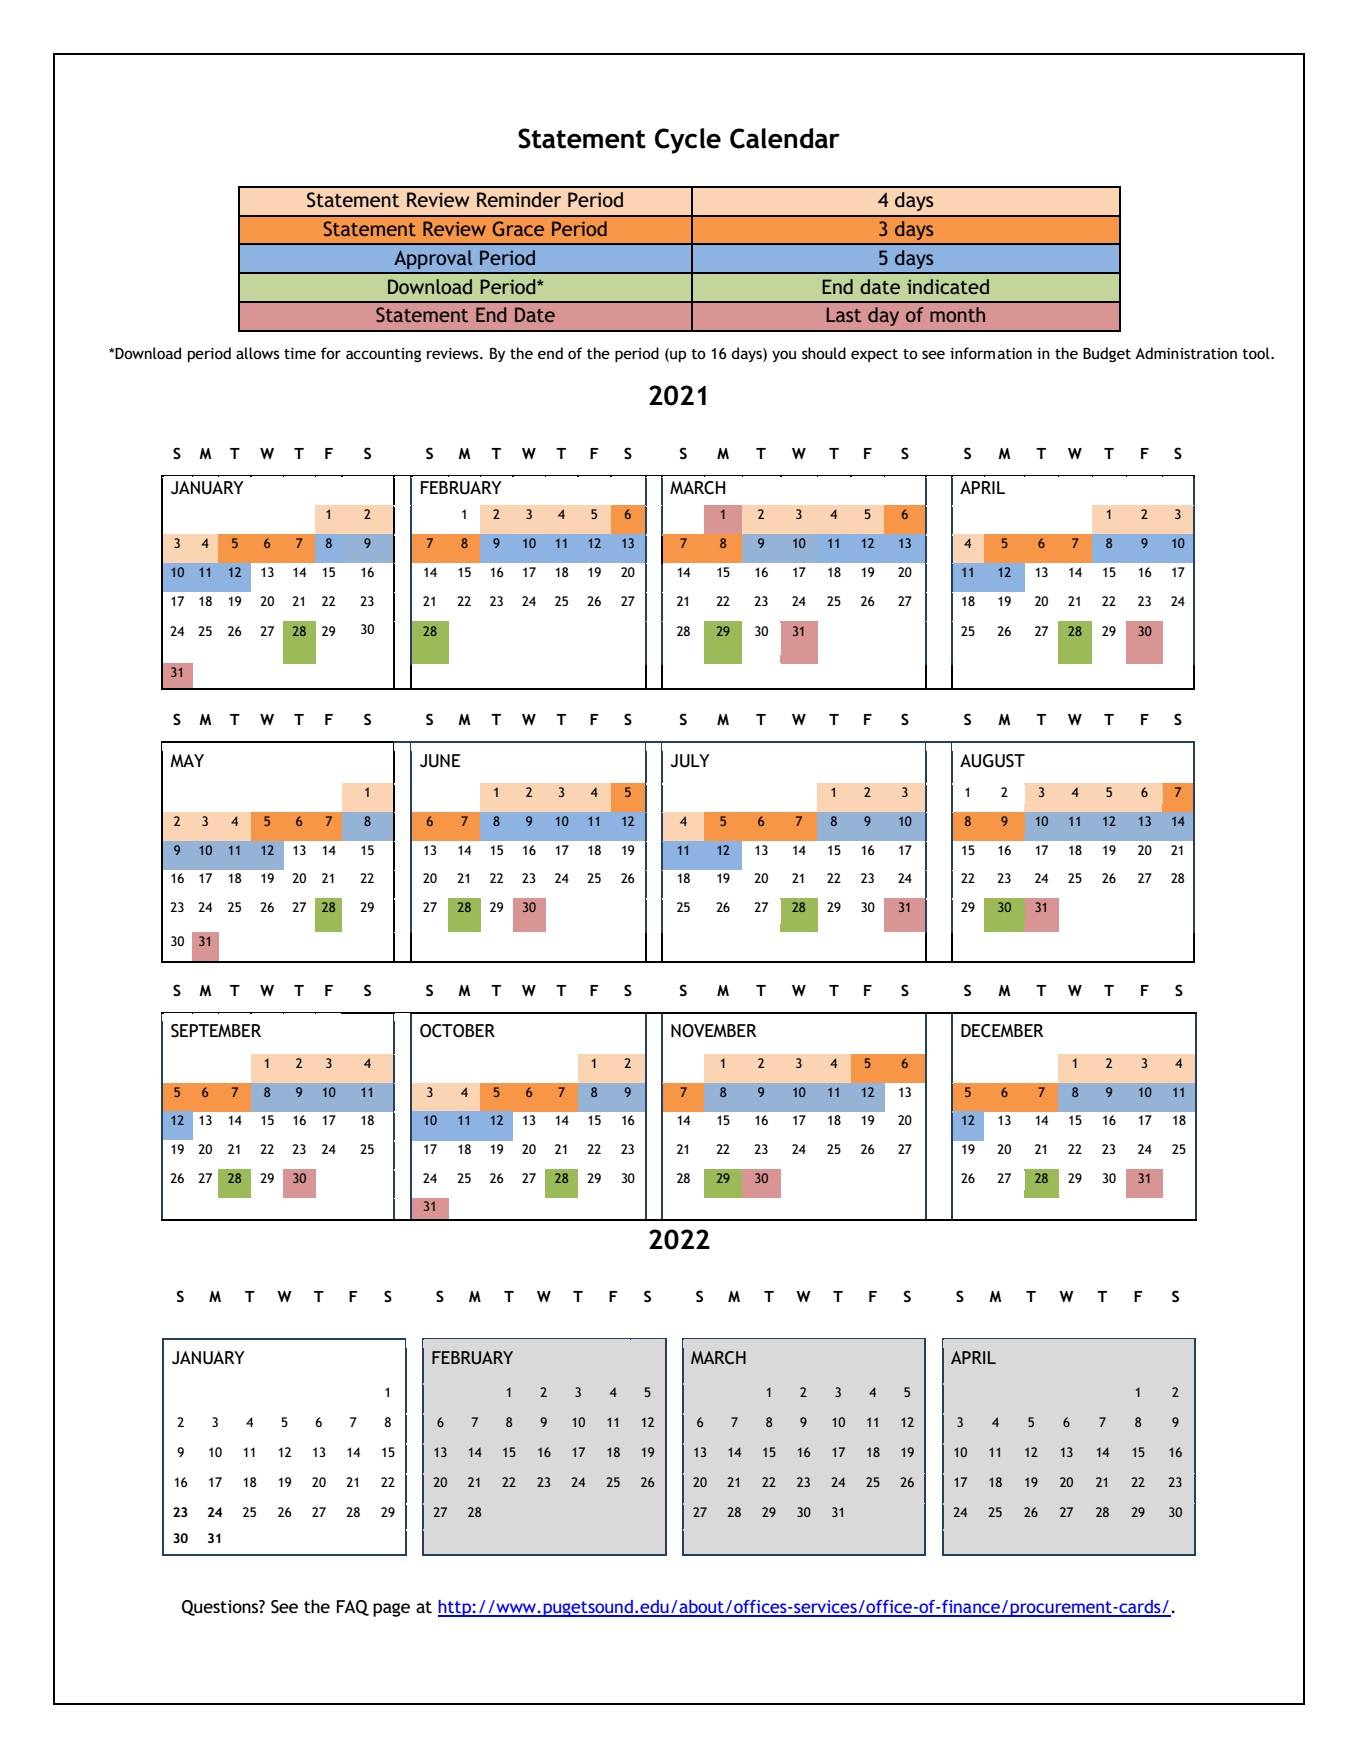 Office of Finance Statement Cycle Calendar for 2021